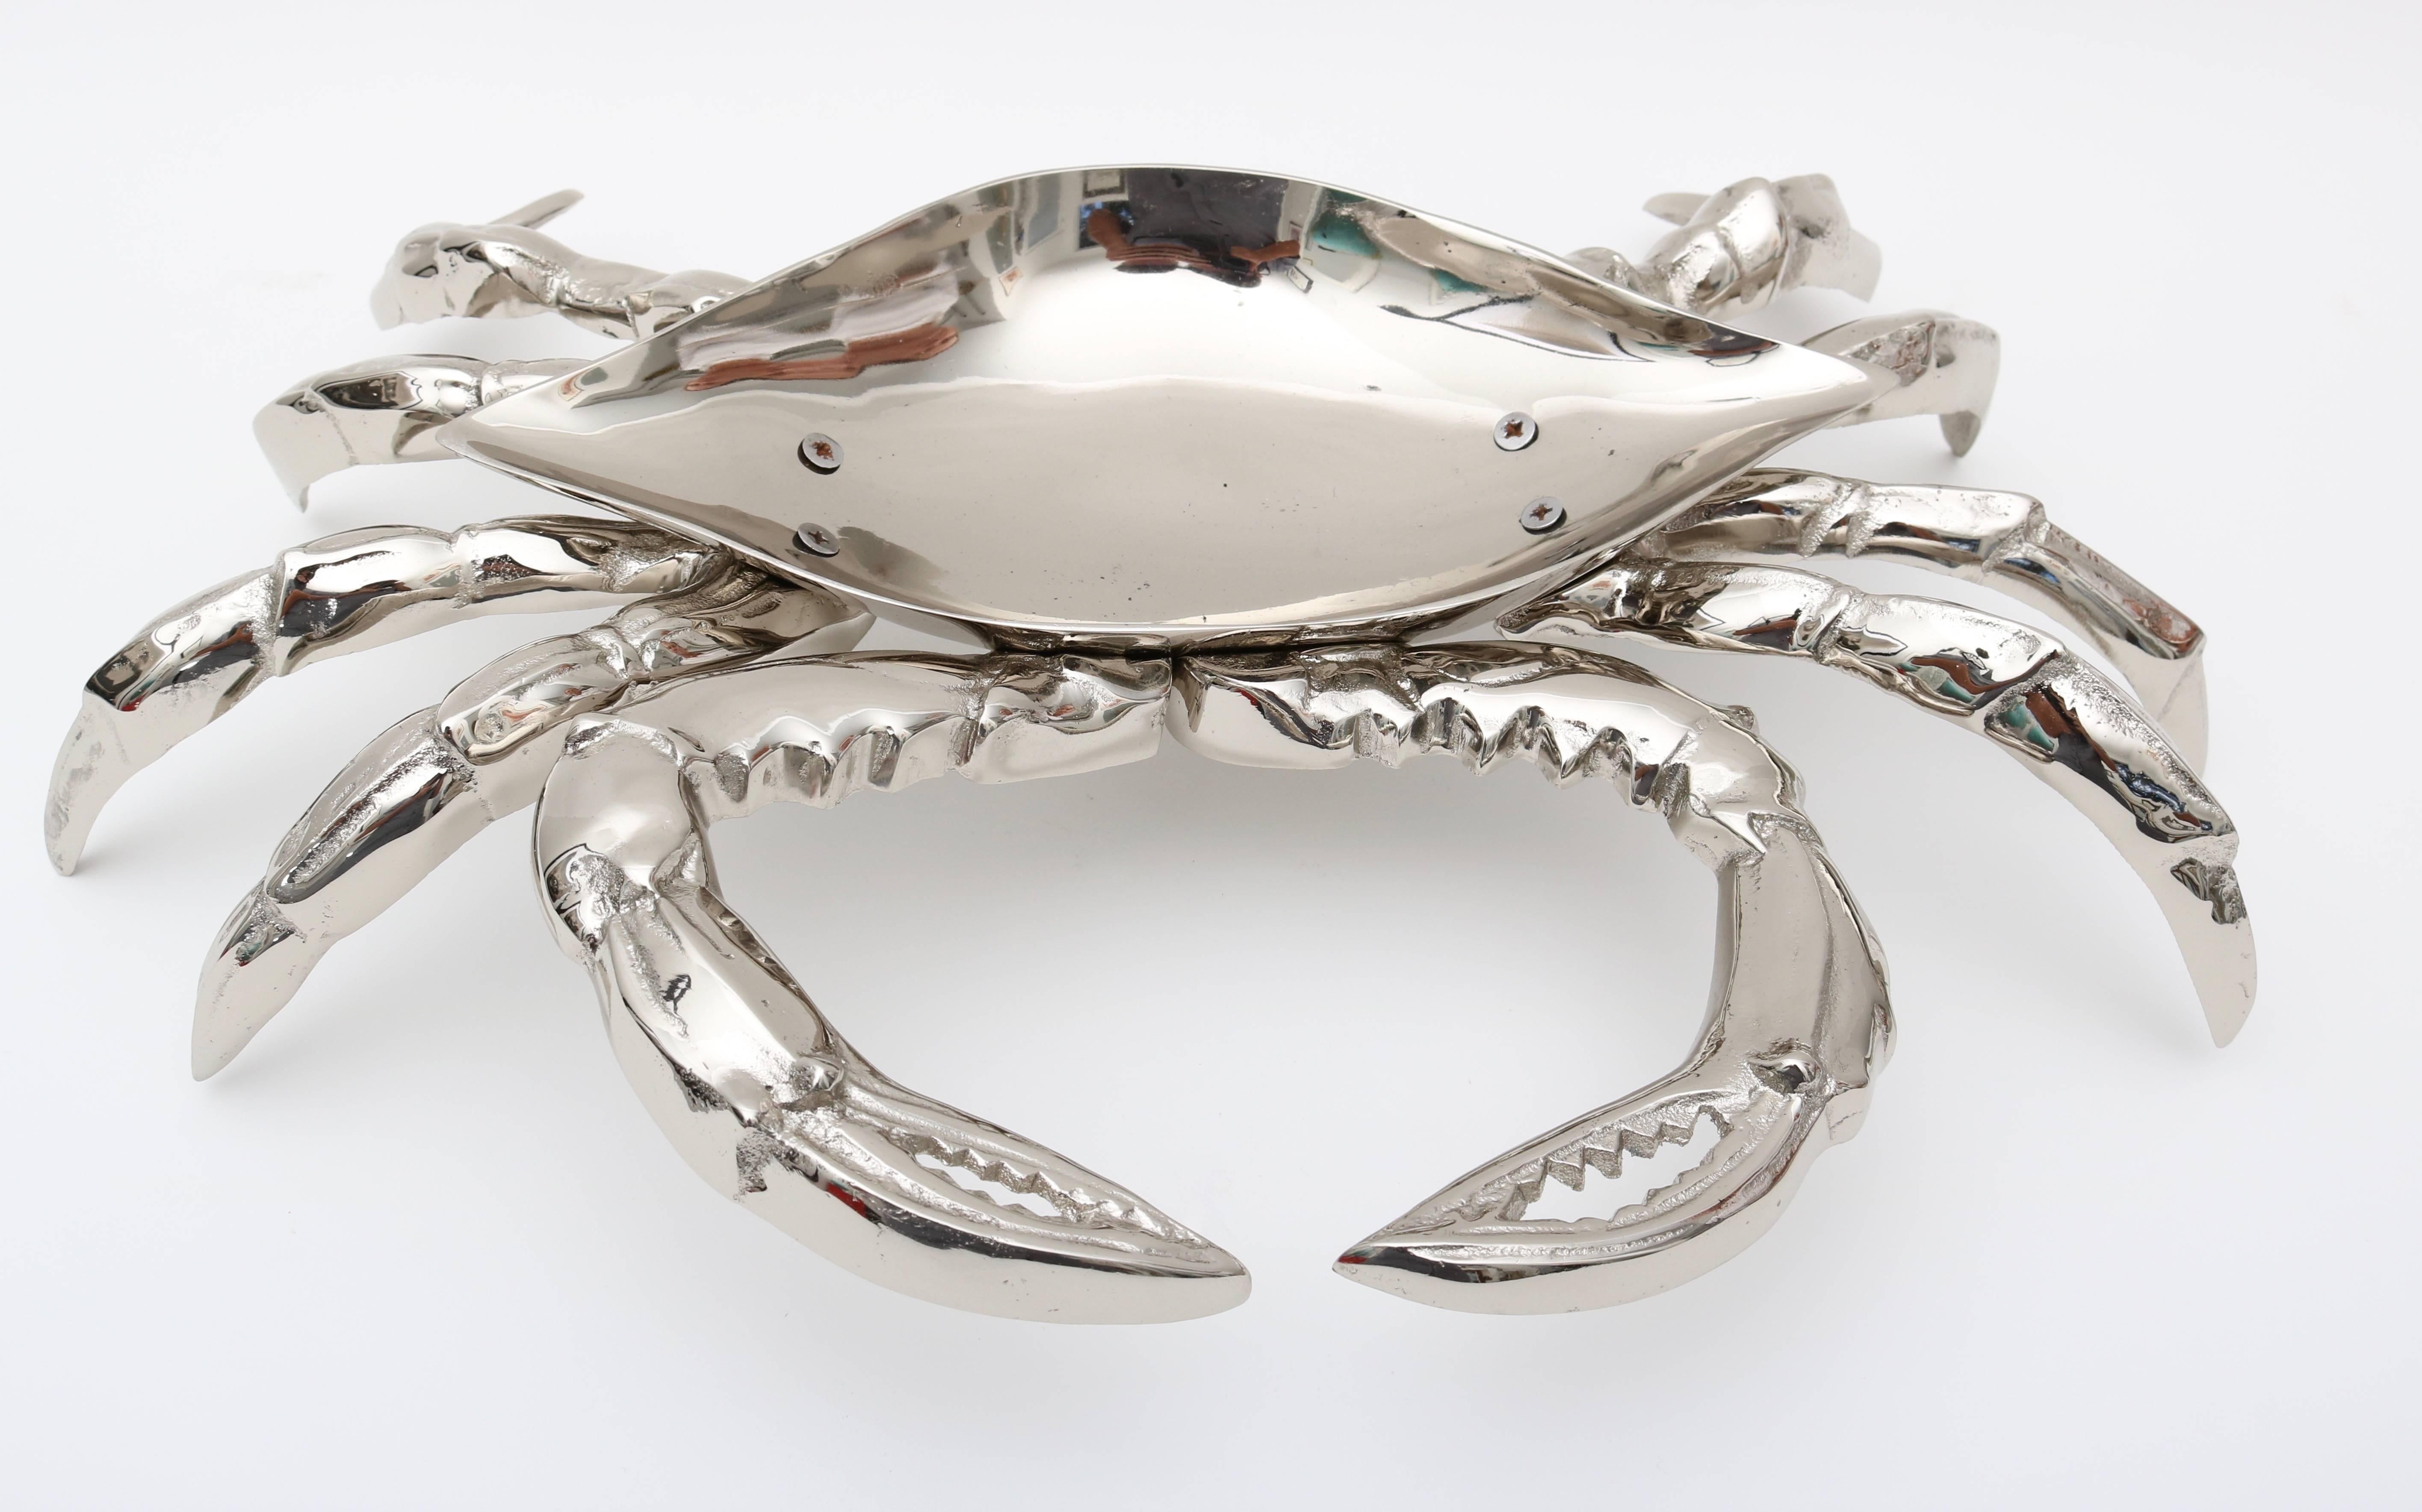 American Nickle-Plated Life Size Crab-Form Lidded Dish by Angel & Zevallos